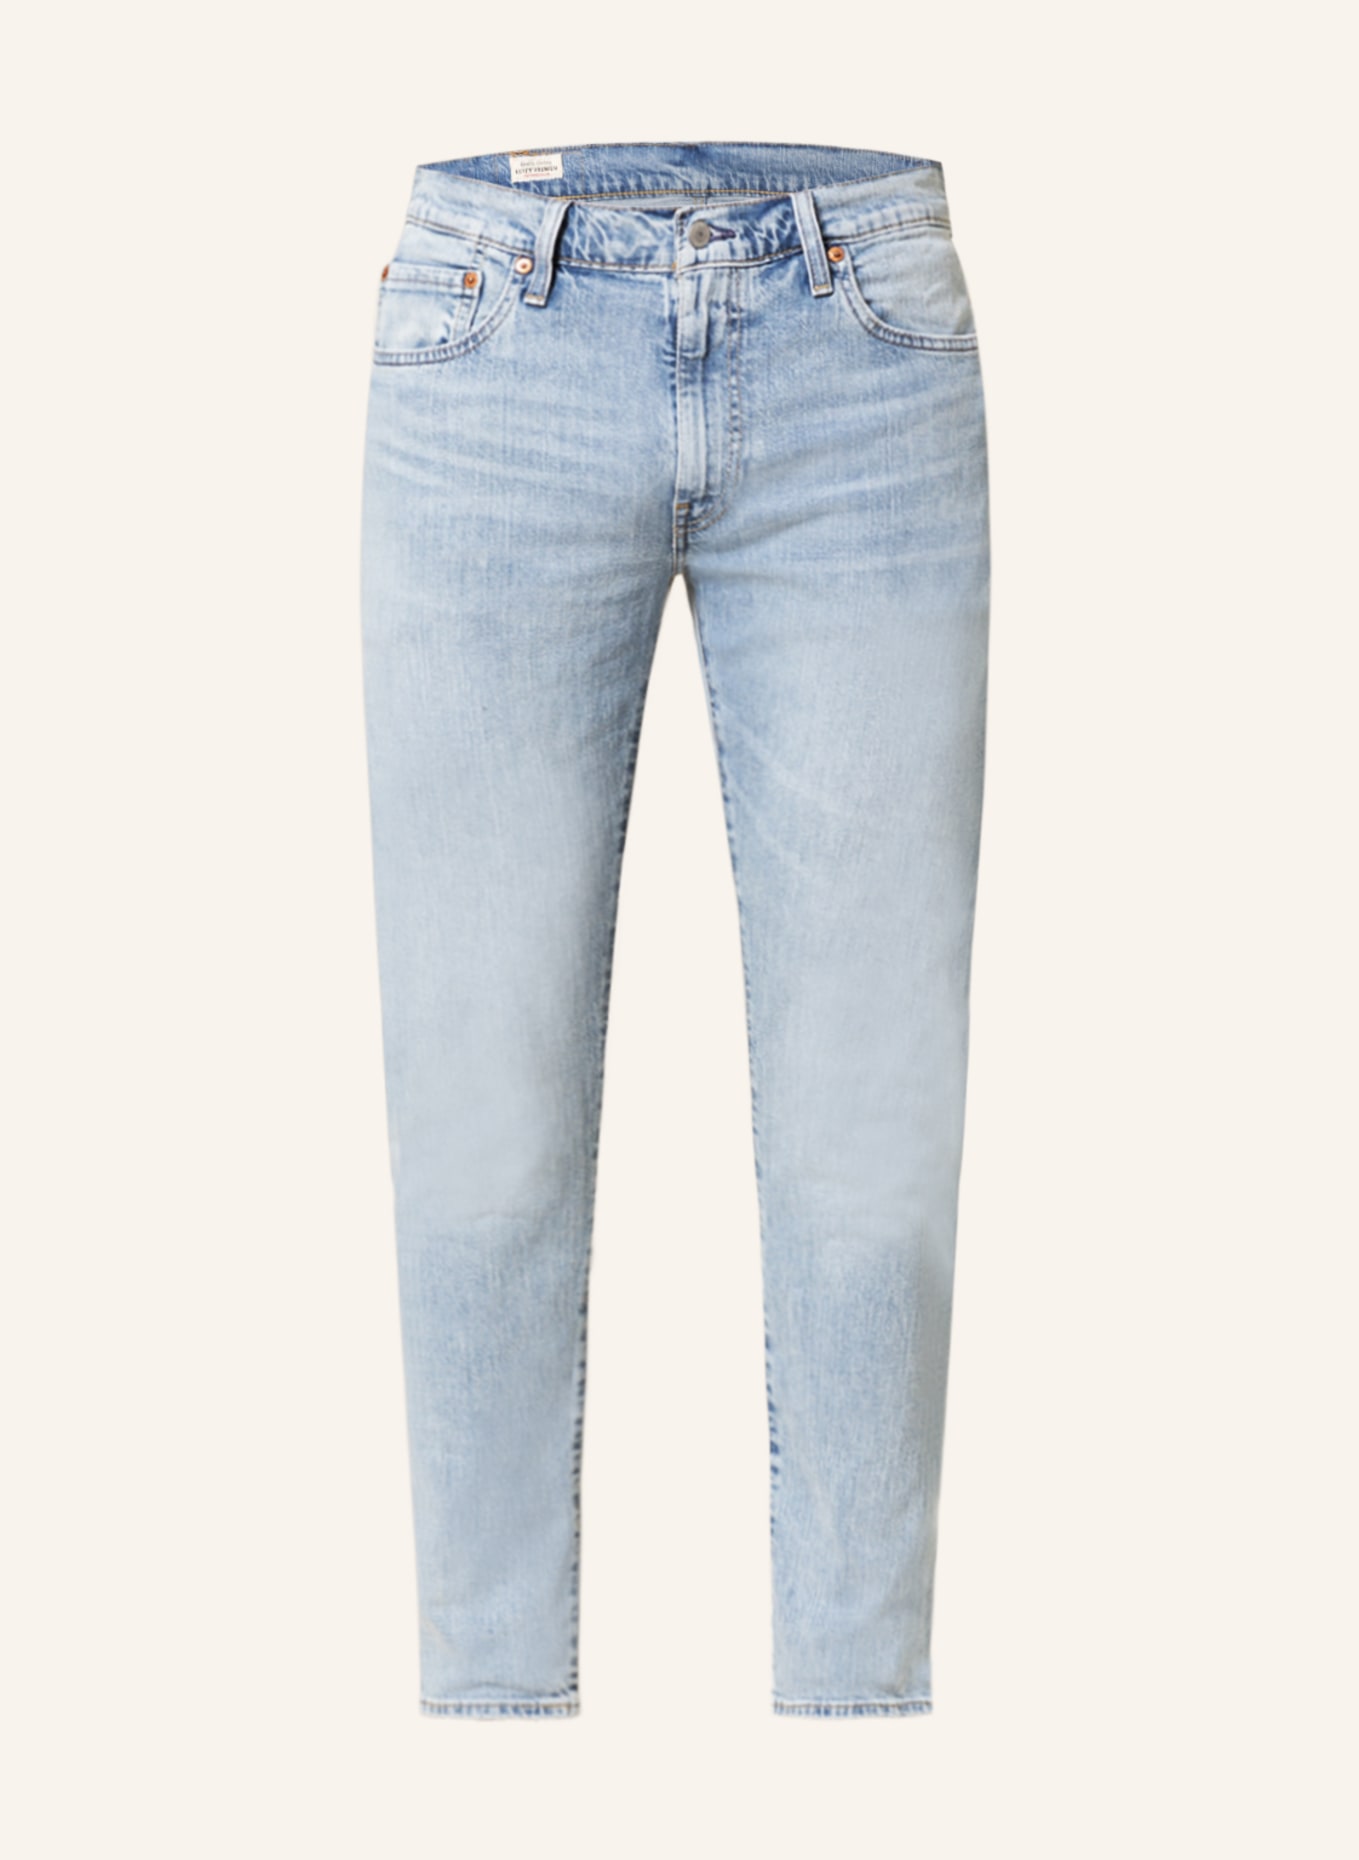 Levi's® Jeans 512 tapered fit, Color: 50 Light Indigo - Worn In (Image 1)